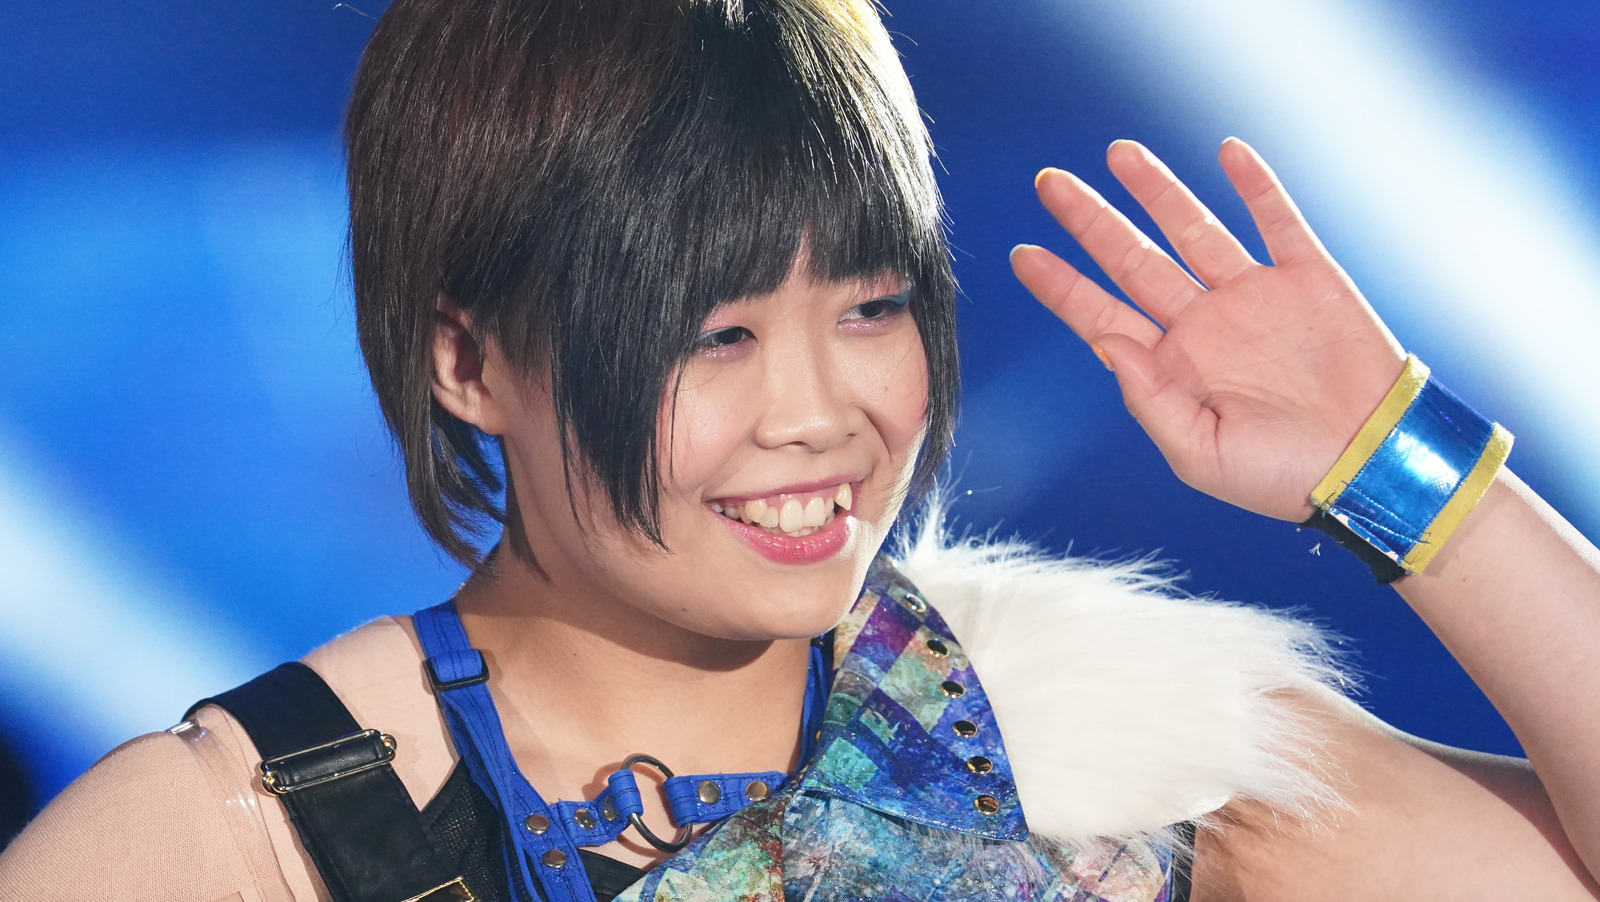 MIRAI Wins STARDOM's Cinderella Tournament For The Second Year In A Row